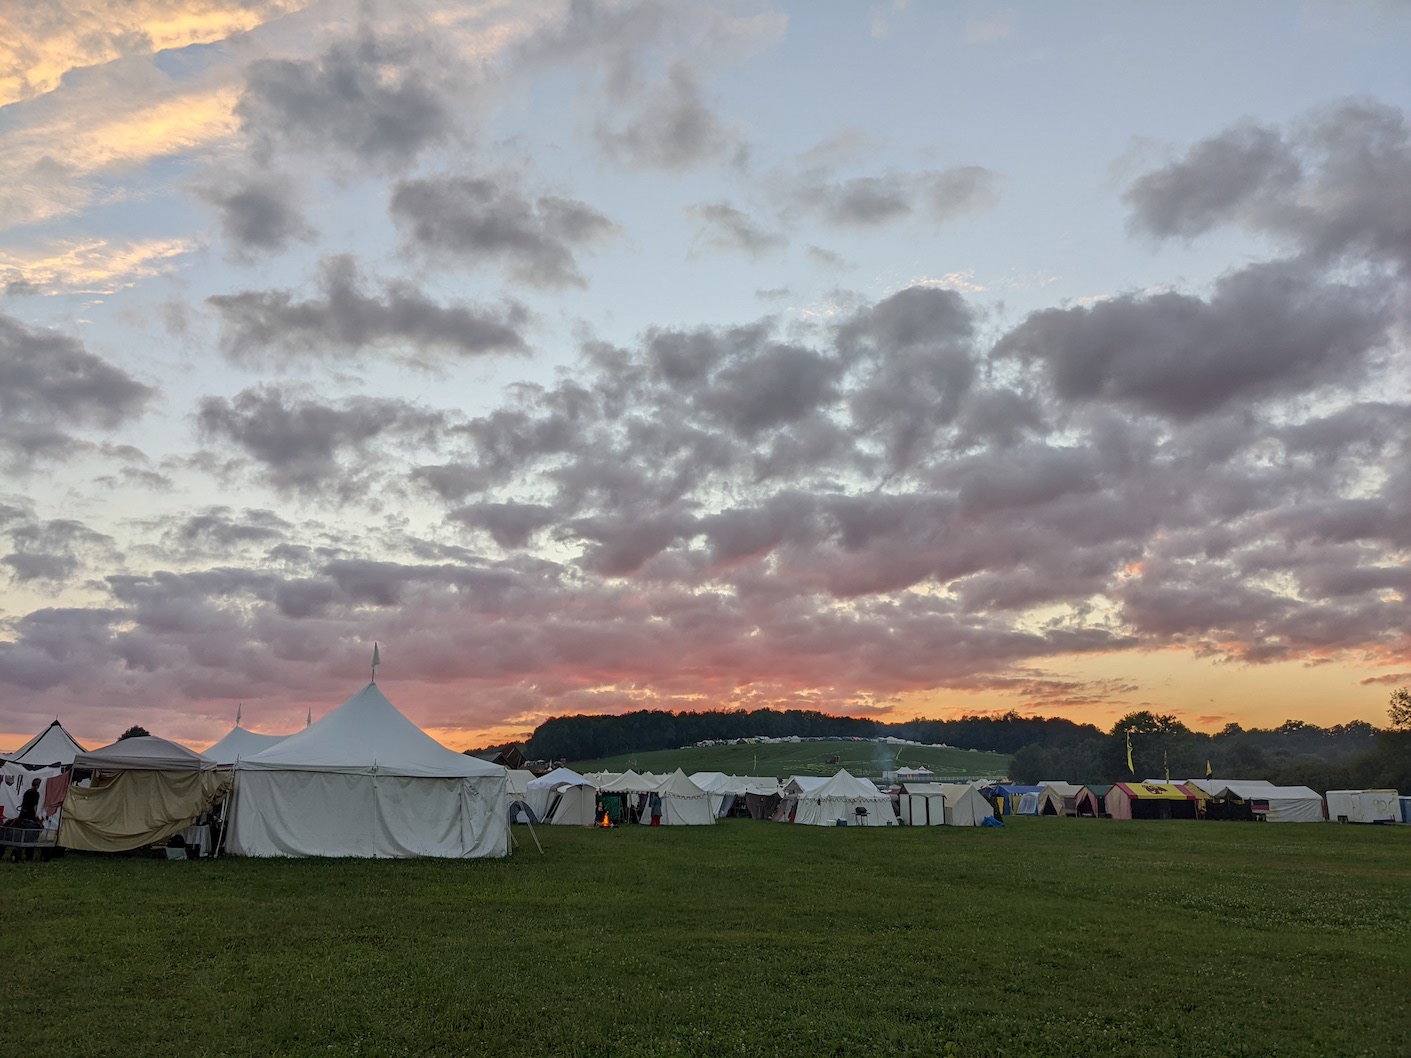 similar sky but more of the color at the horizon is visible behind a row of tents; a small fire is lit in front of one of them